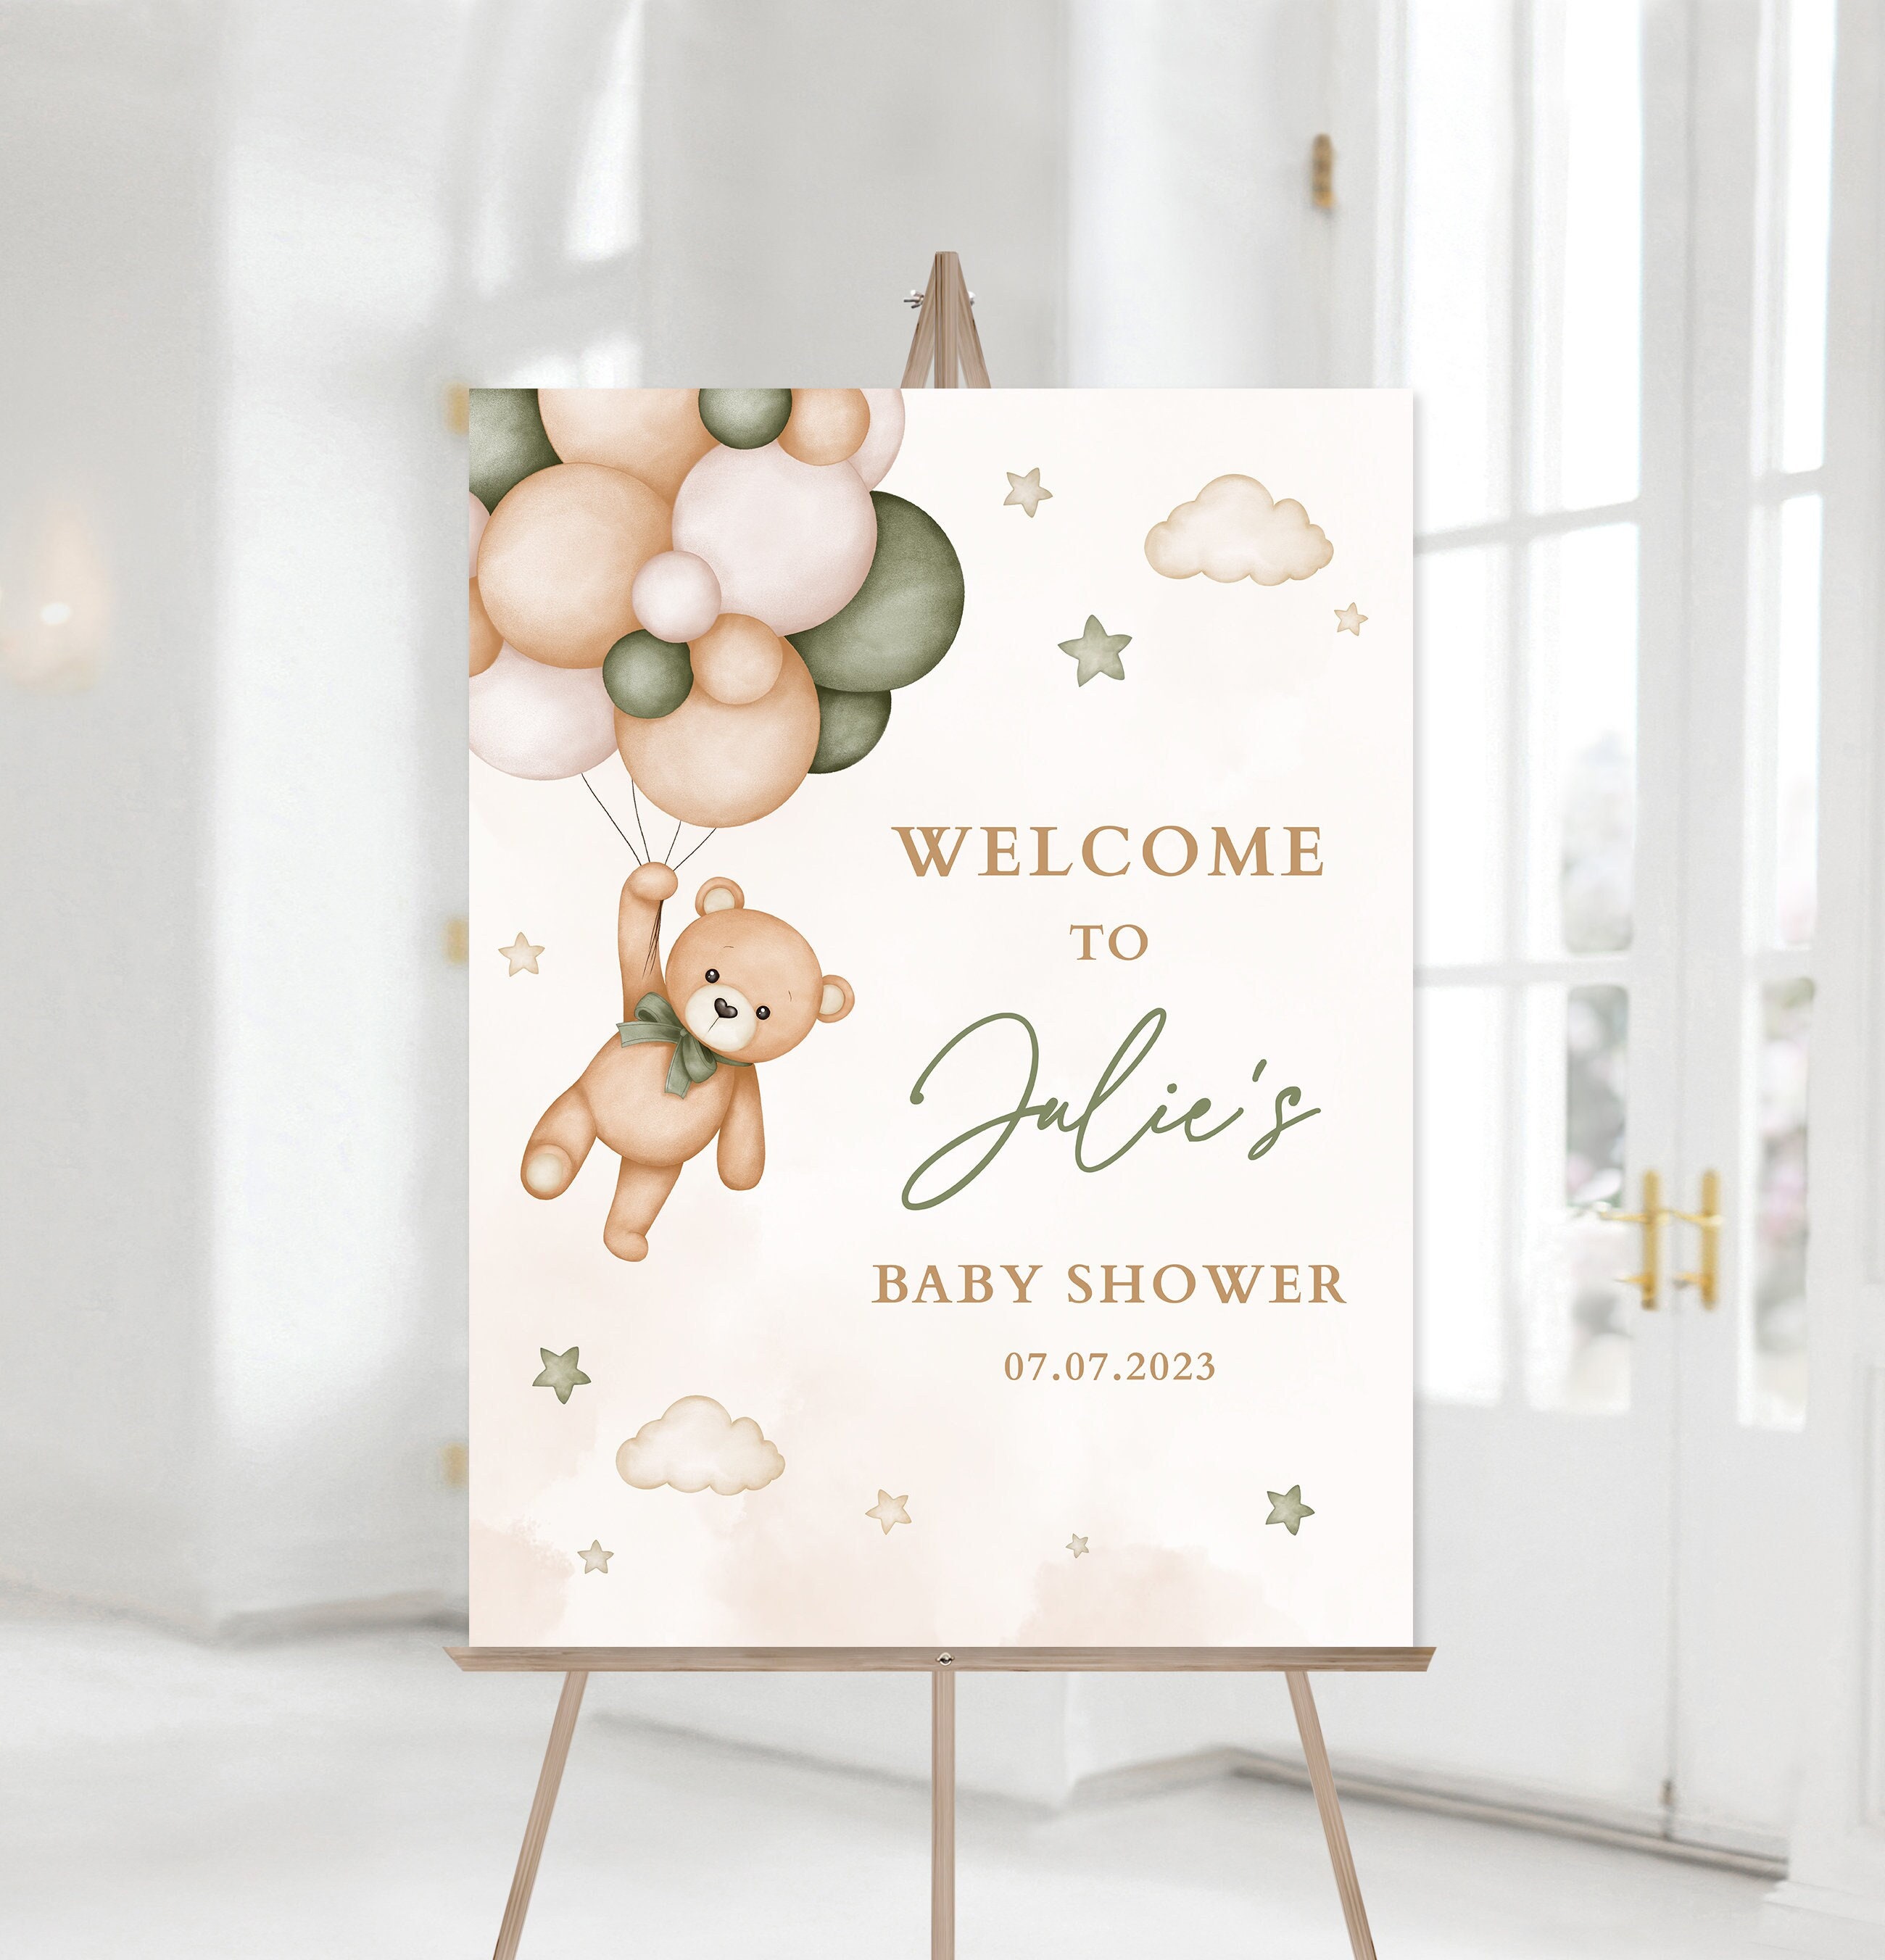 241 Pcs - Baby Shower Decorations - Baby Boy, Shop Today. Get it Tomorrow!